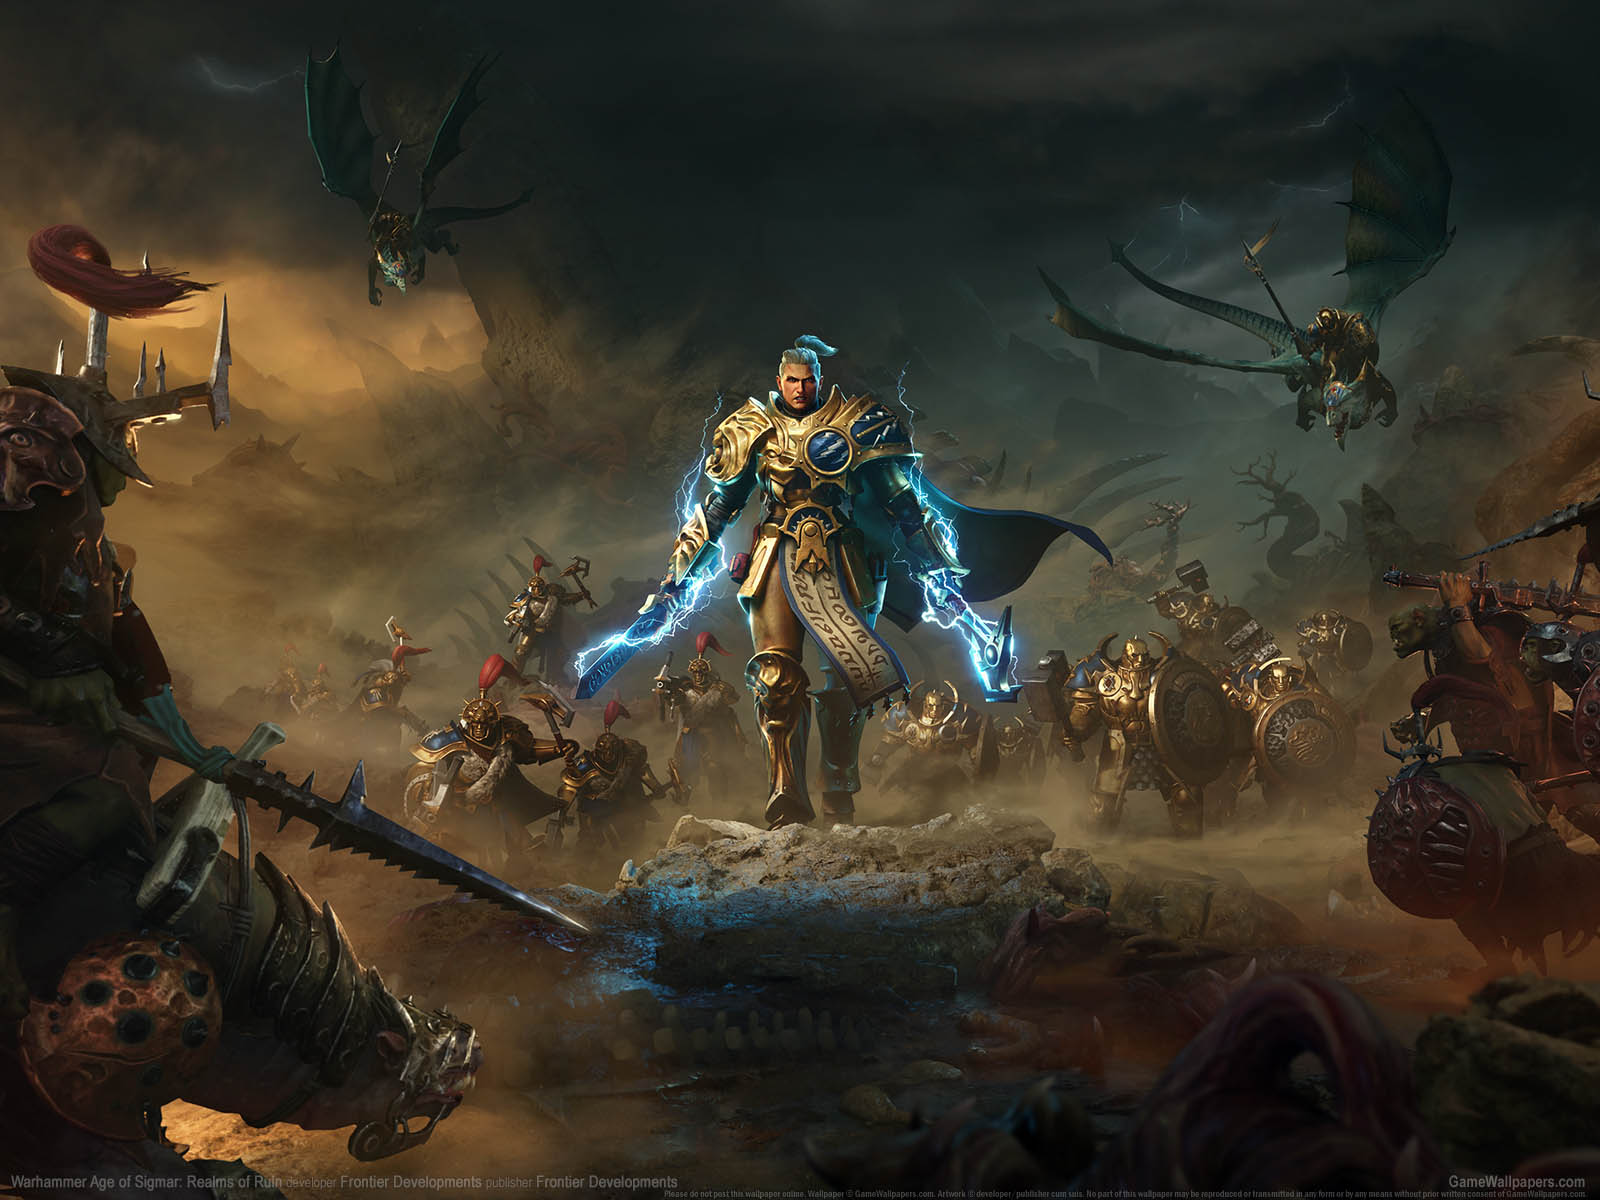 Warhammer Age of Sigmar%3A Realms of Ruin wallpaper 01 1600x1200